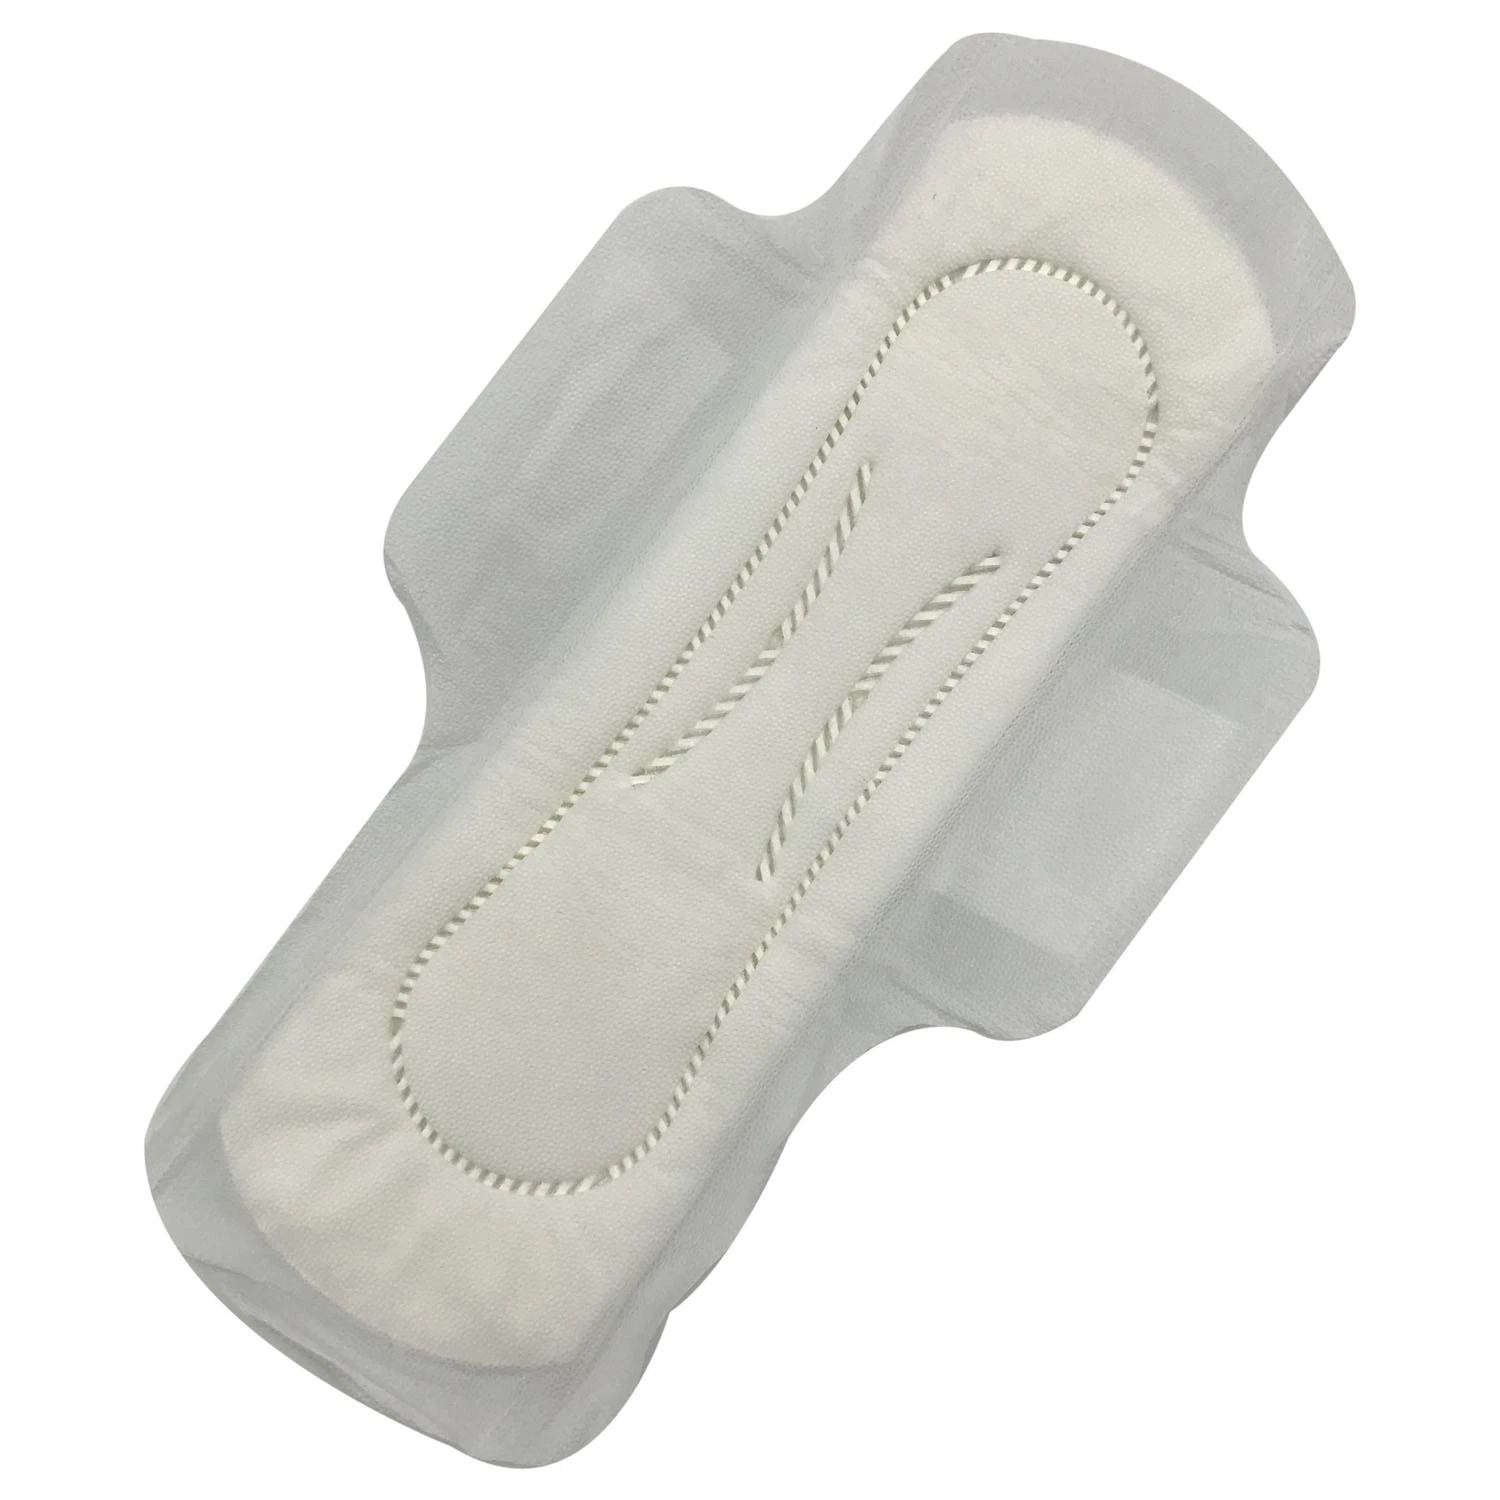 Disposable Sanitary Napkin for Africa, Maternity Pads for Women